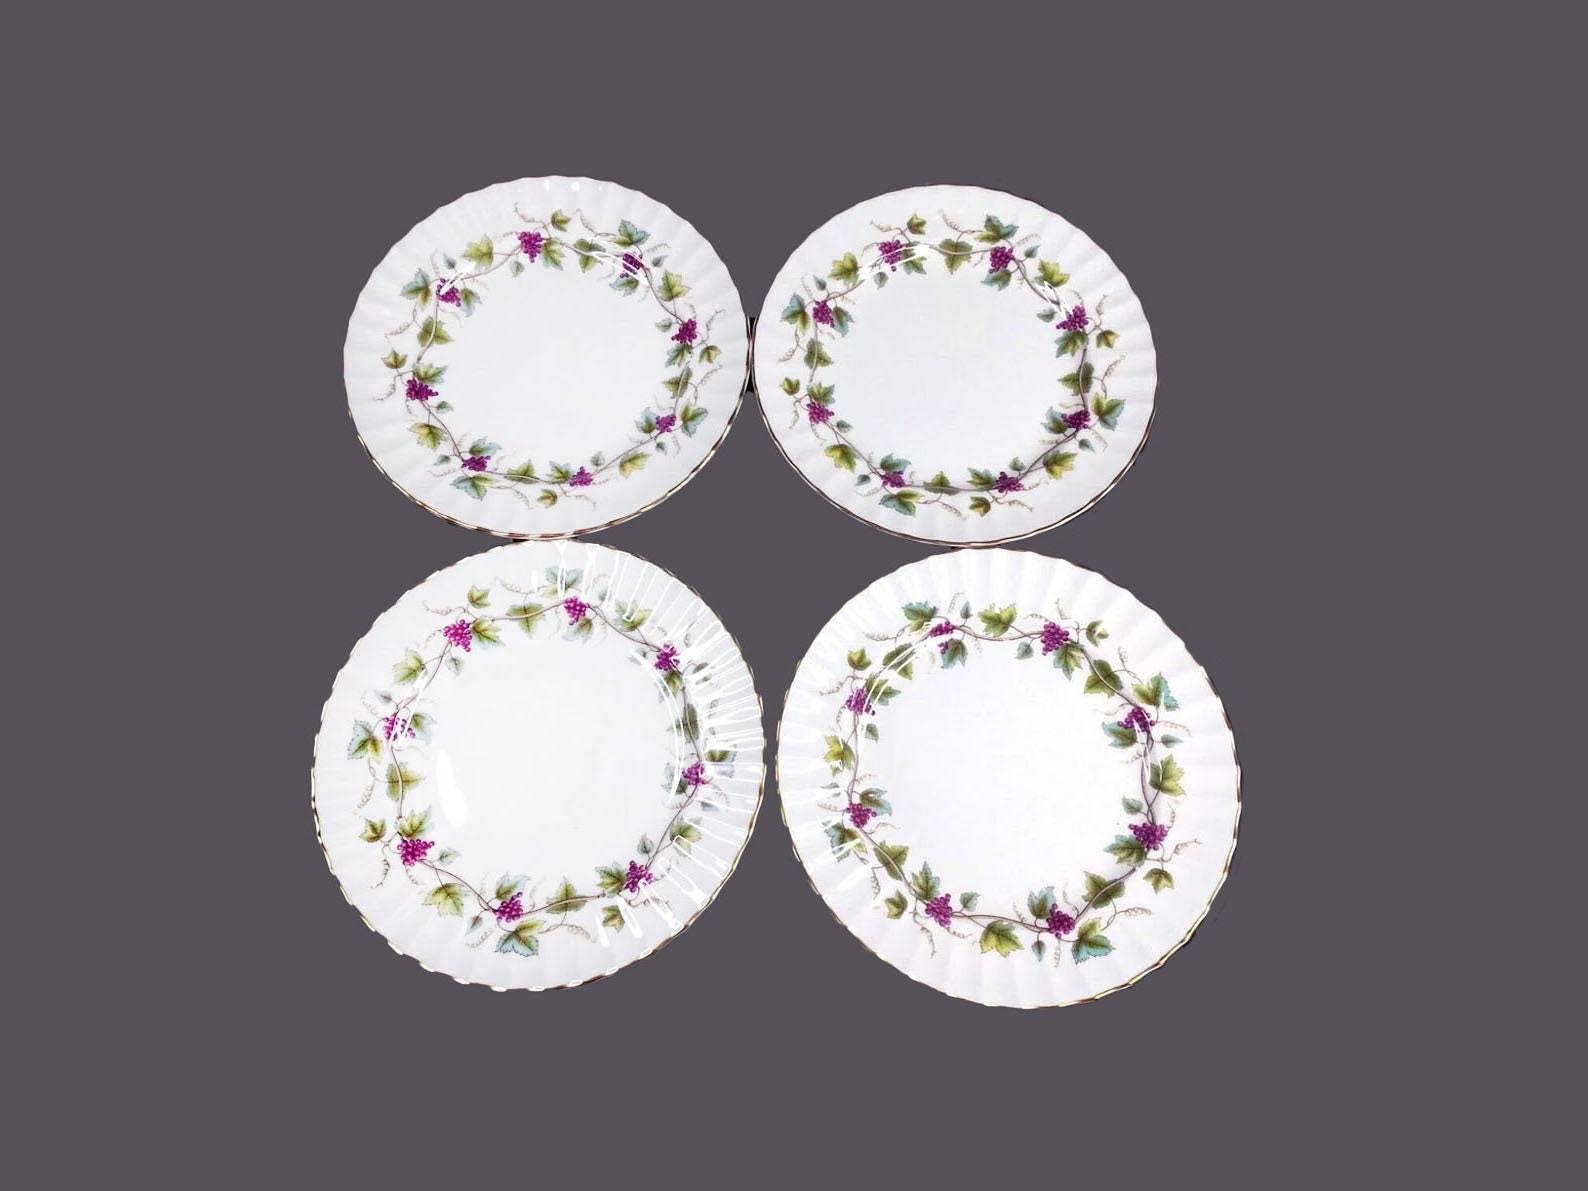 Royal Worcester Bacchanal White salad plates. Bone china made in England. - $53.39 - $70.49